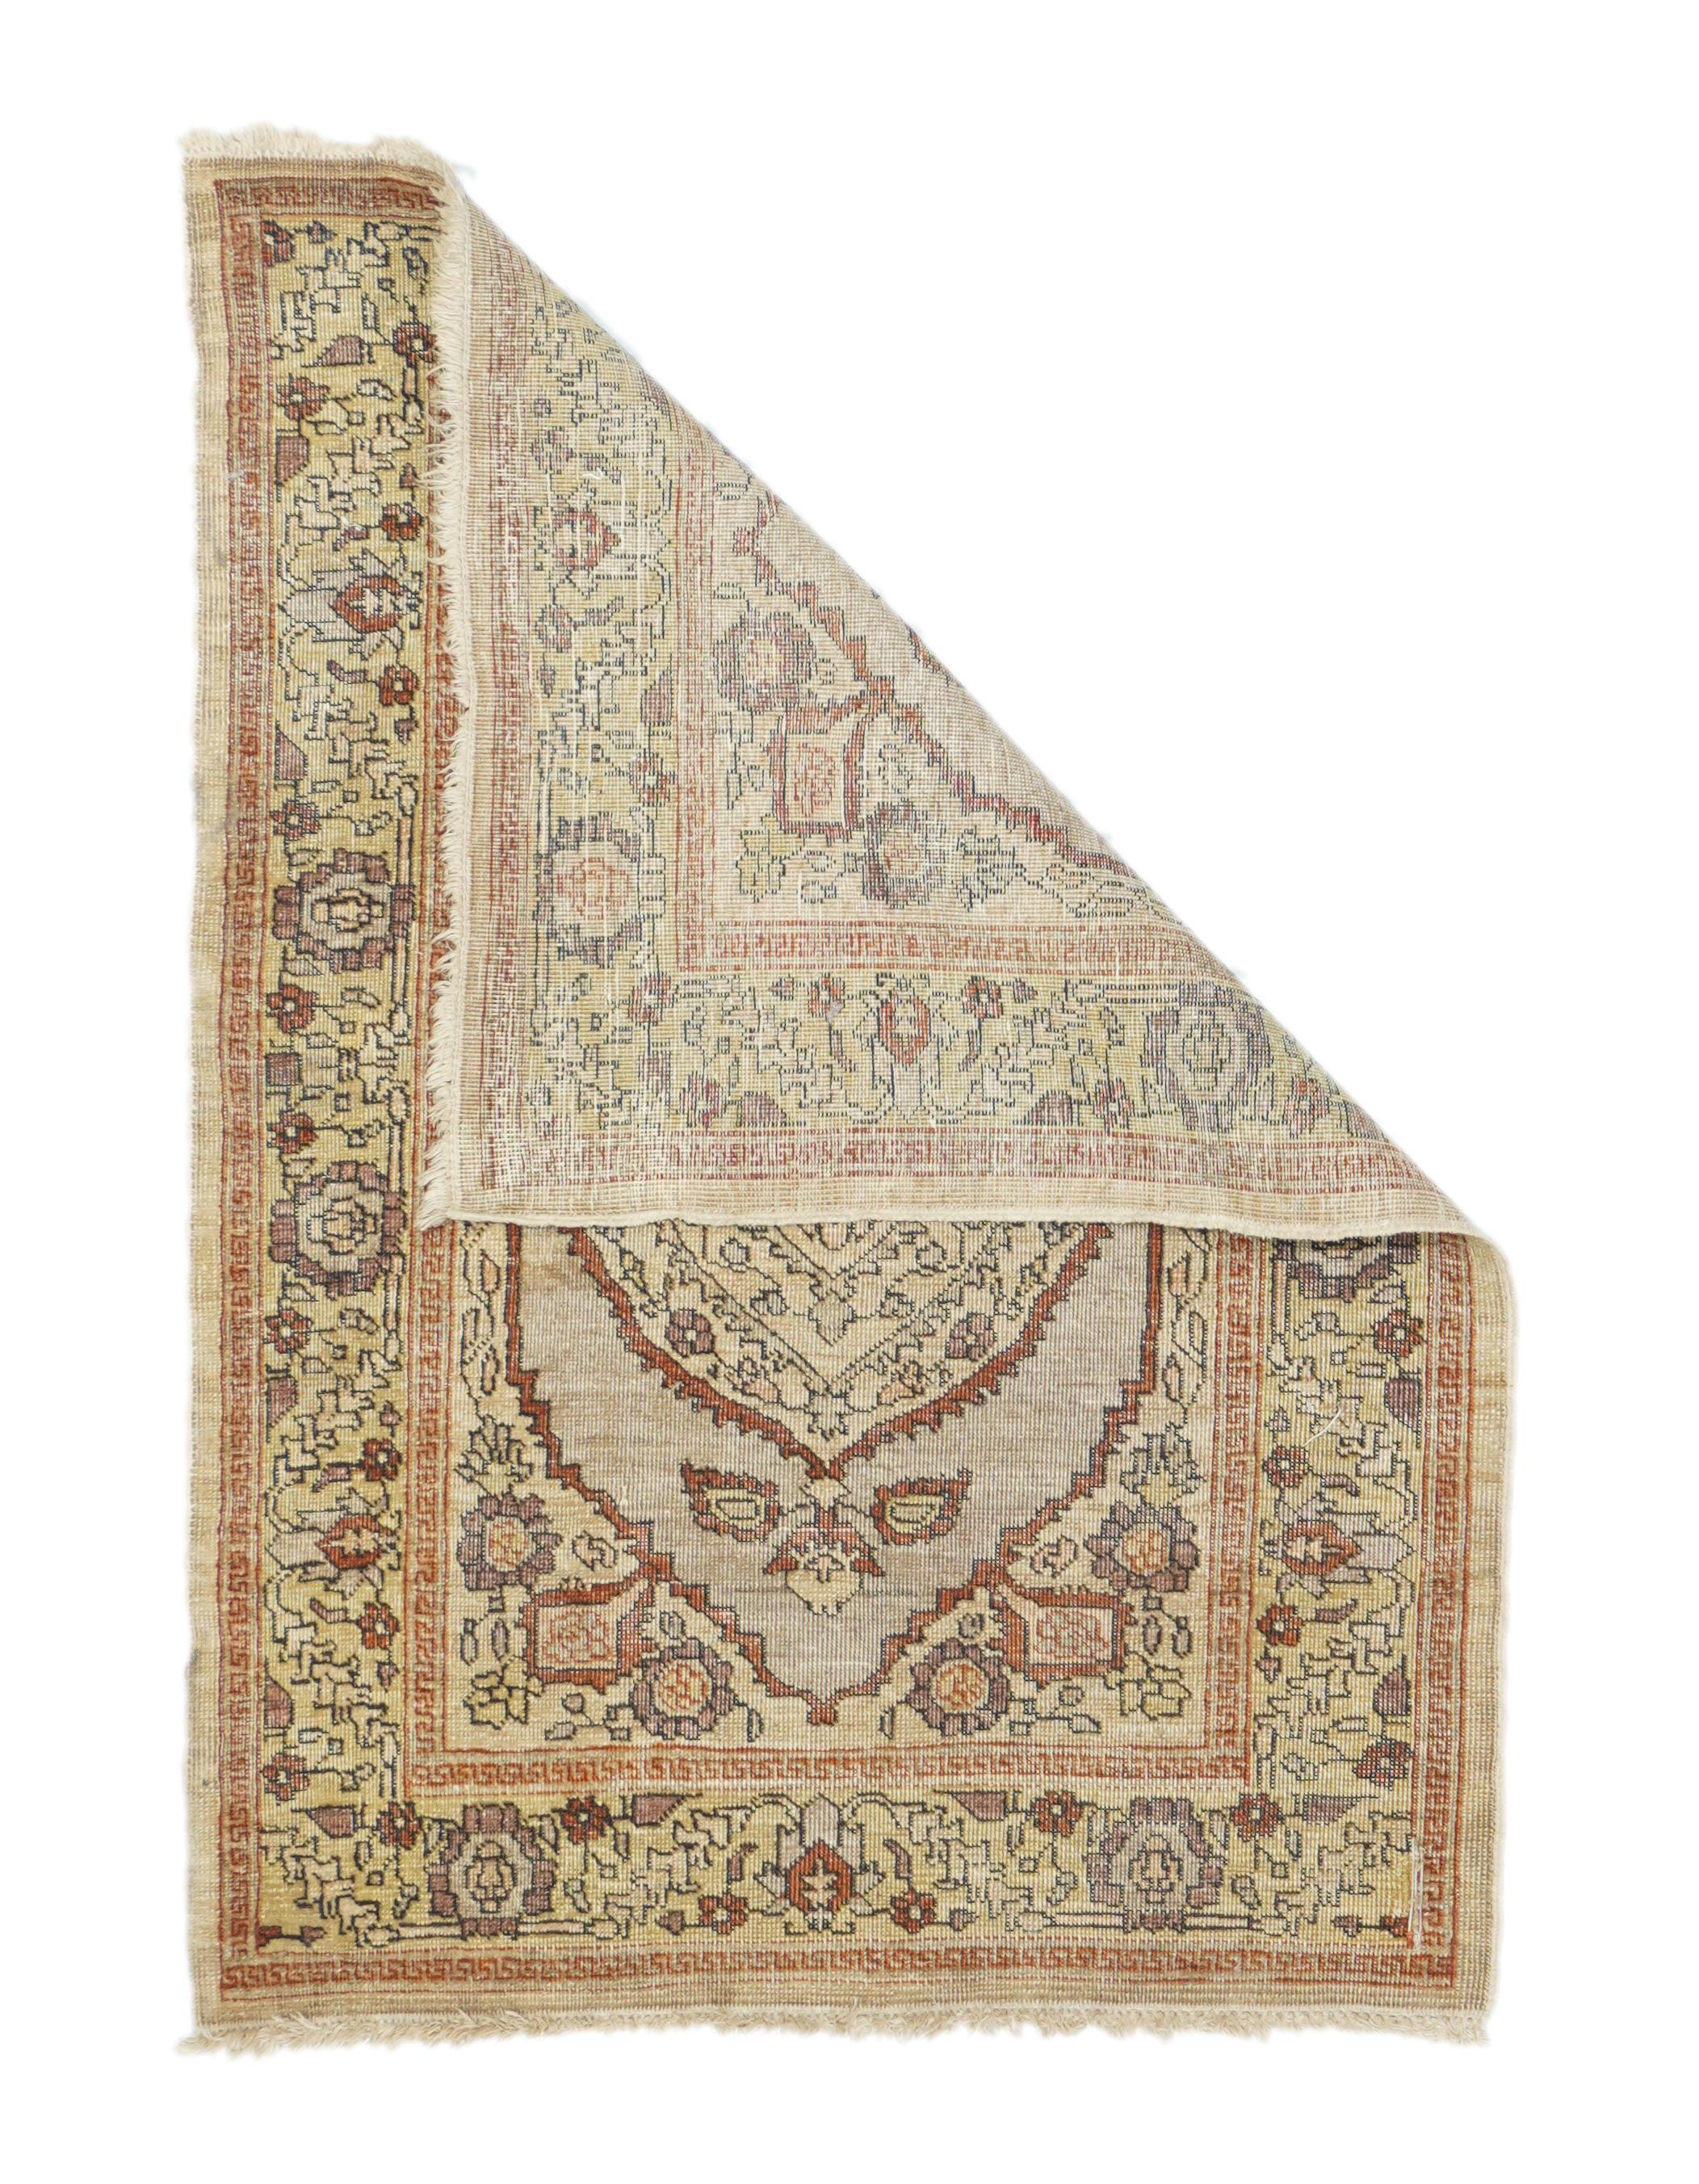 Antique Haji Jalili rug, measures : 2' x 2'9''. From the desirable 